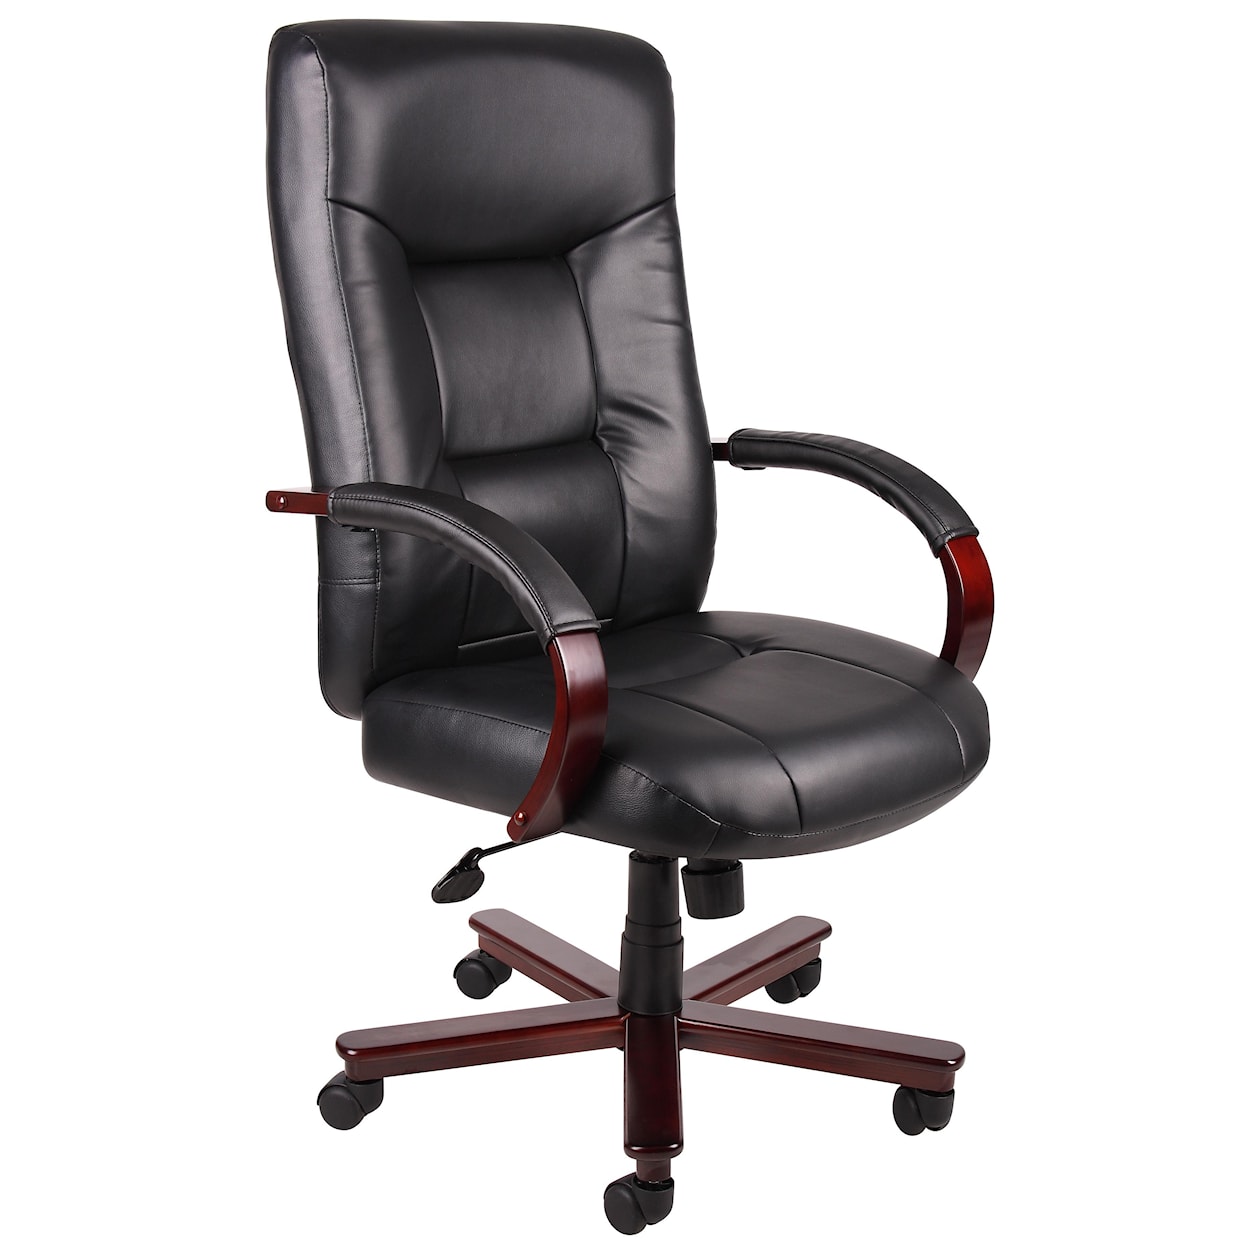 Presidential Seating Executive Chairs Leather Executive Chair